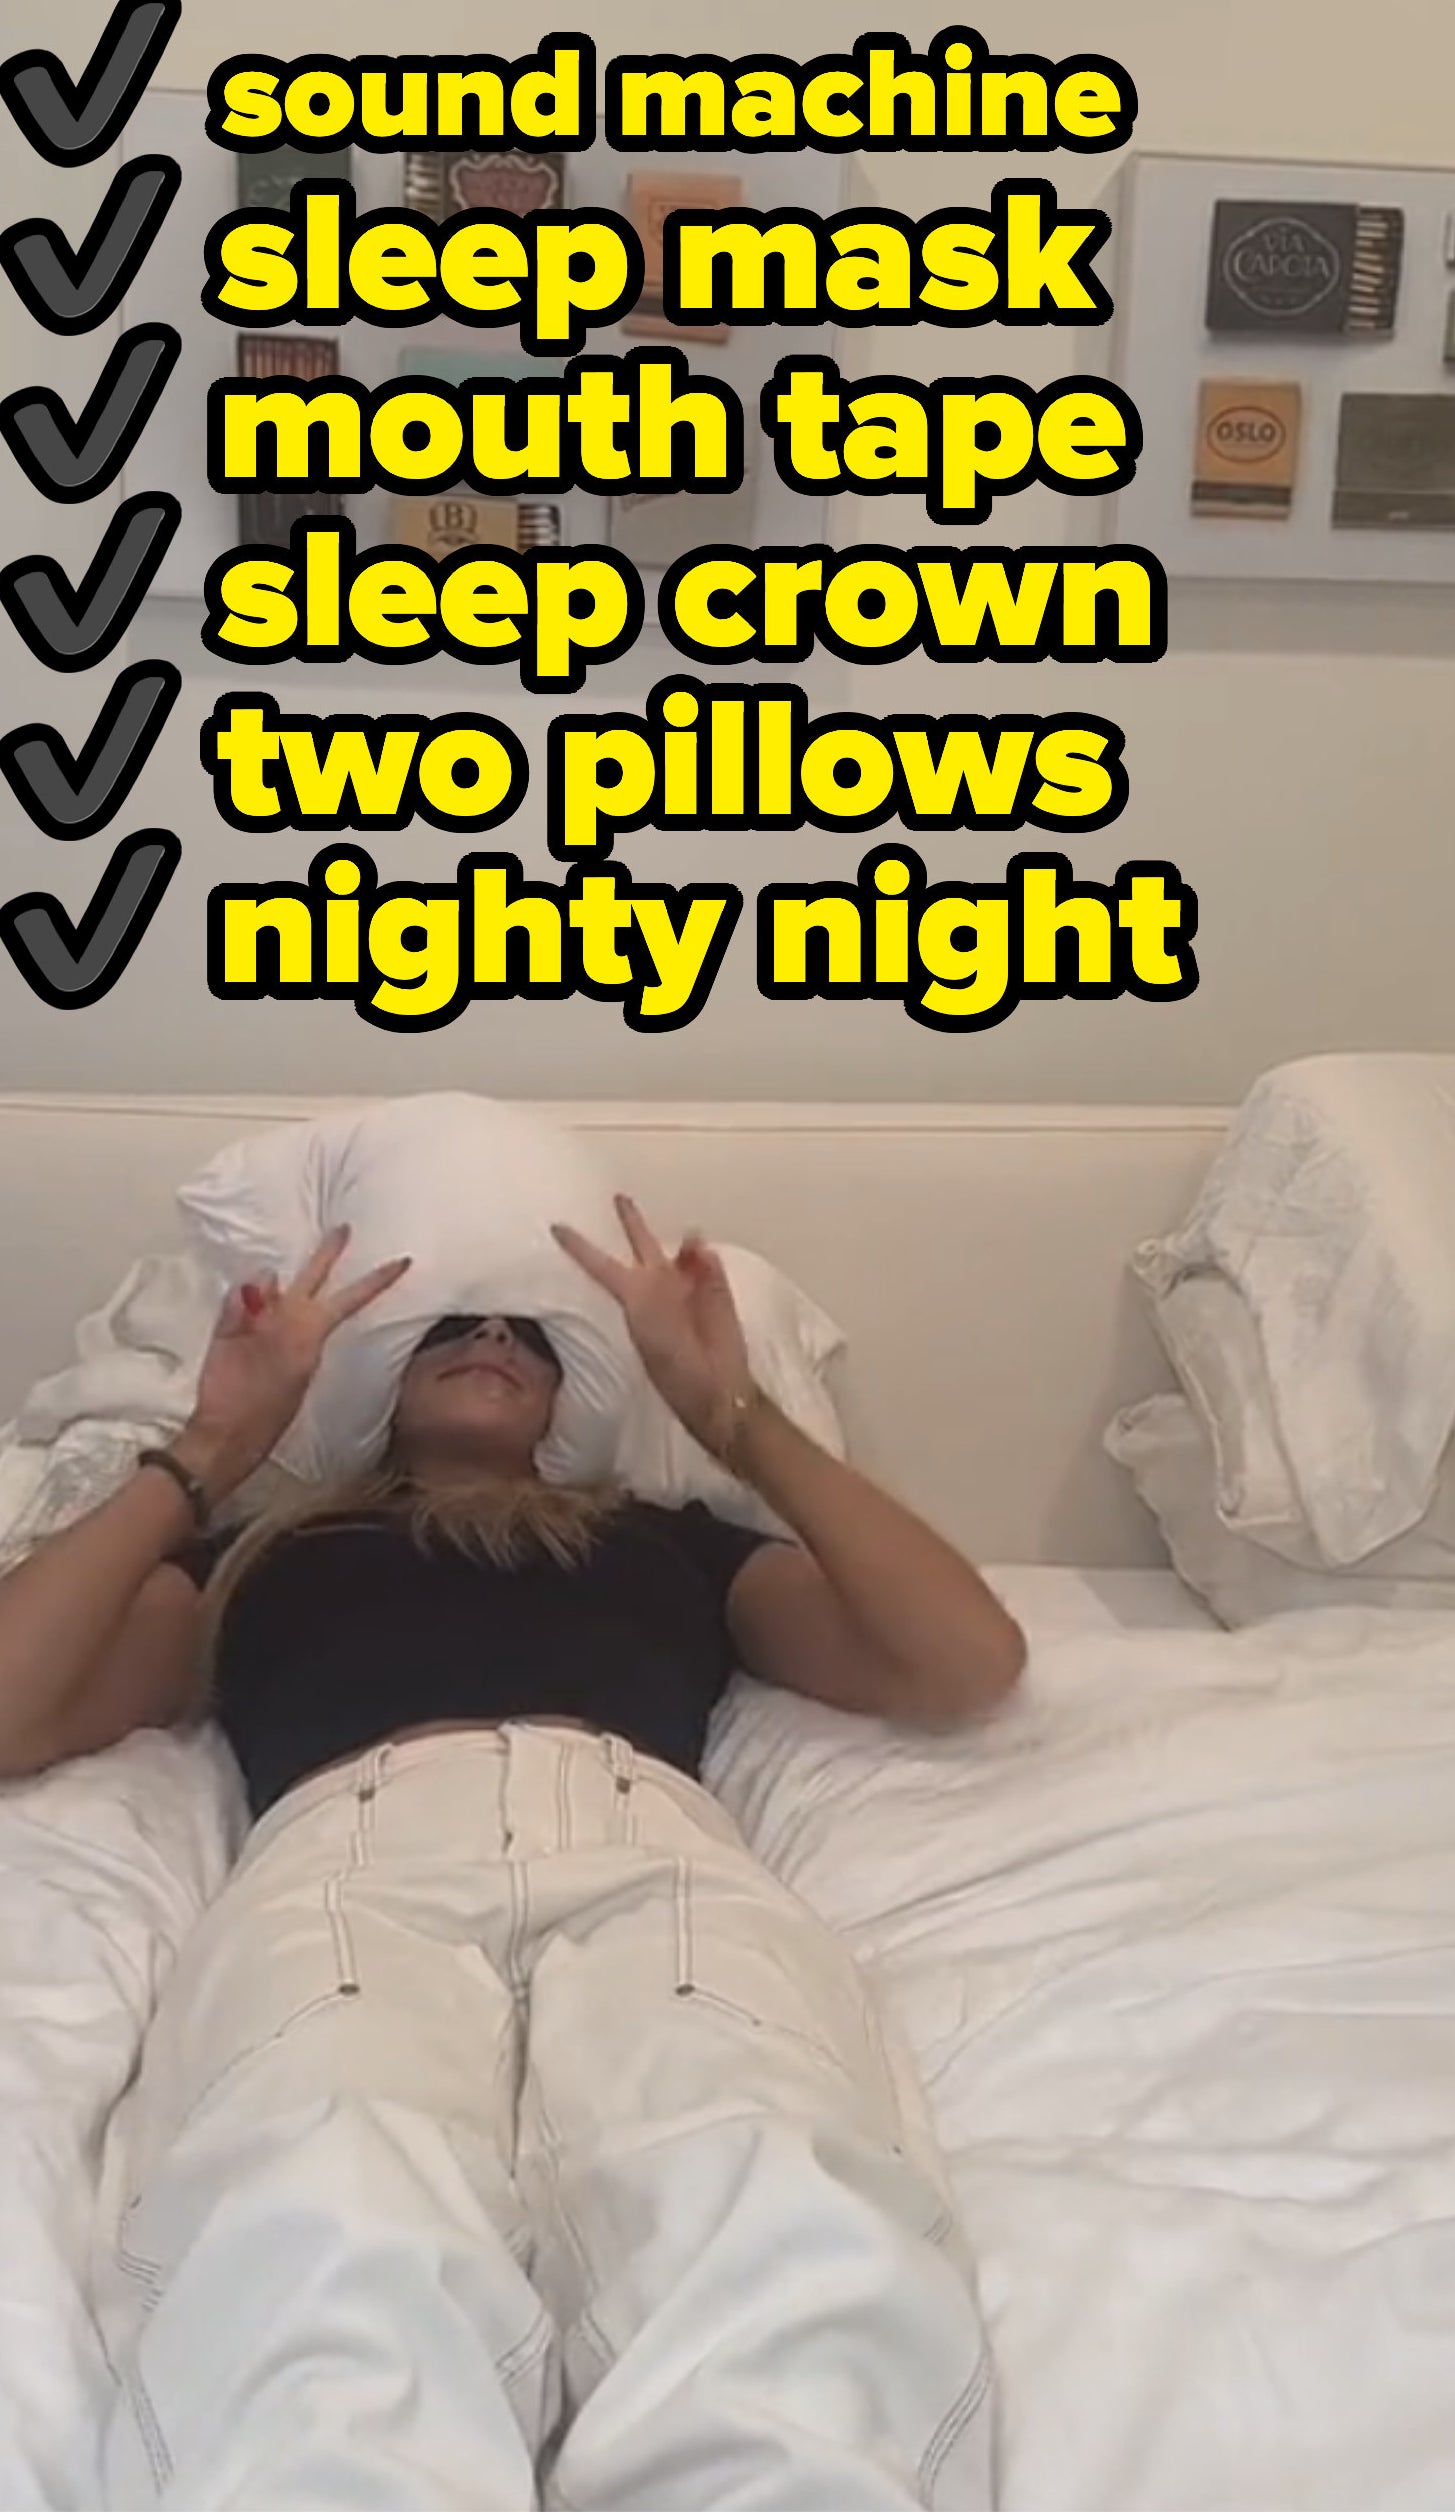 woman laying down with text that says &quot;sound machine, sleep mark, sleep crown, mouth tape, two pillows, nighty night&quot; with check marks beside each word